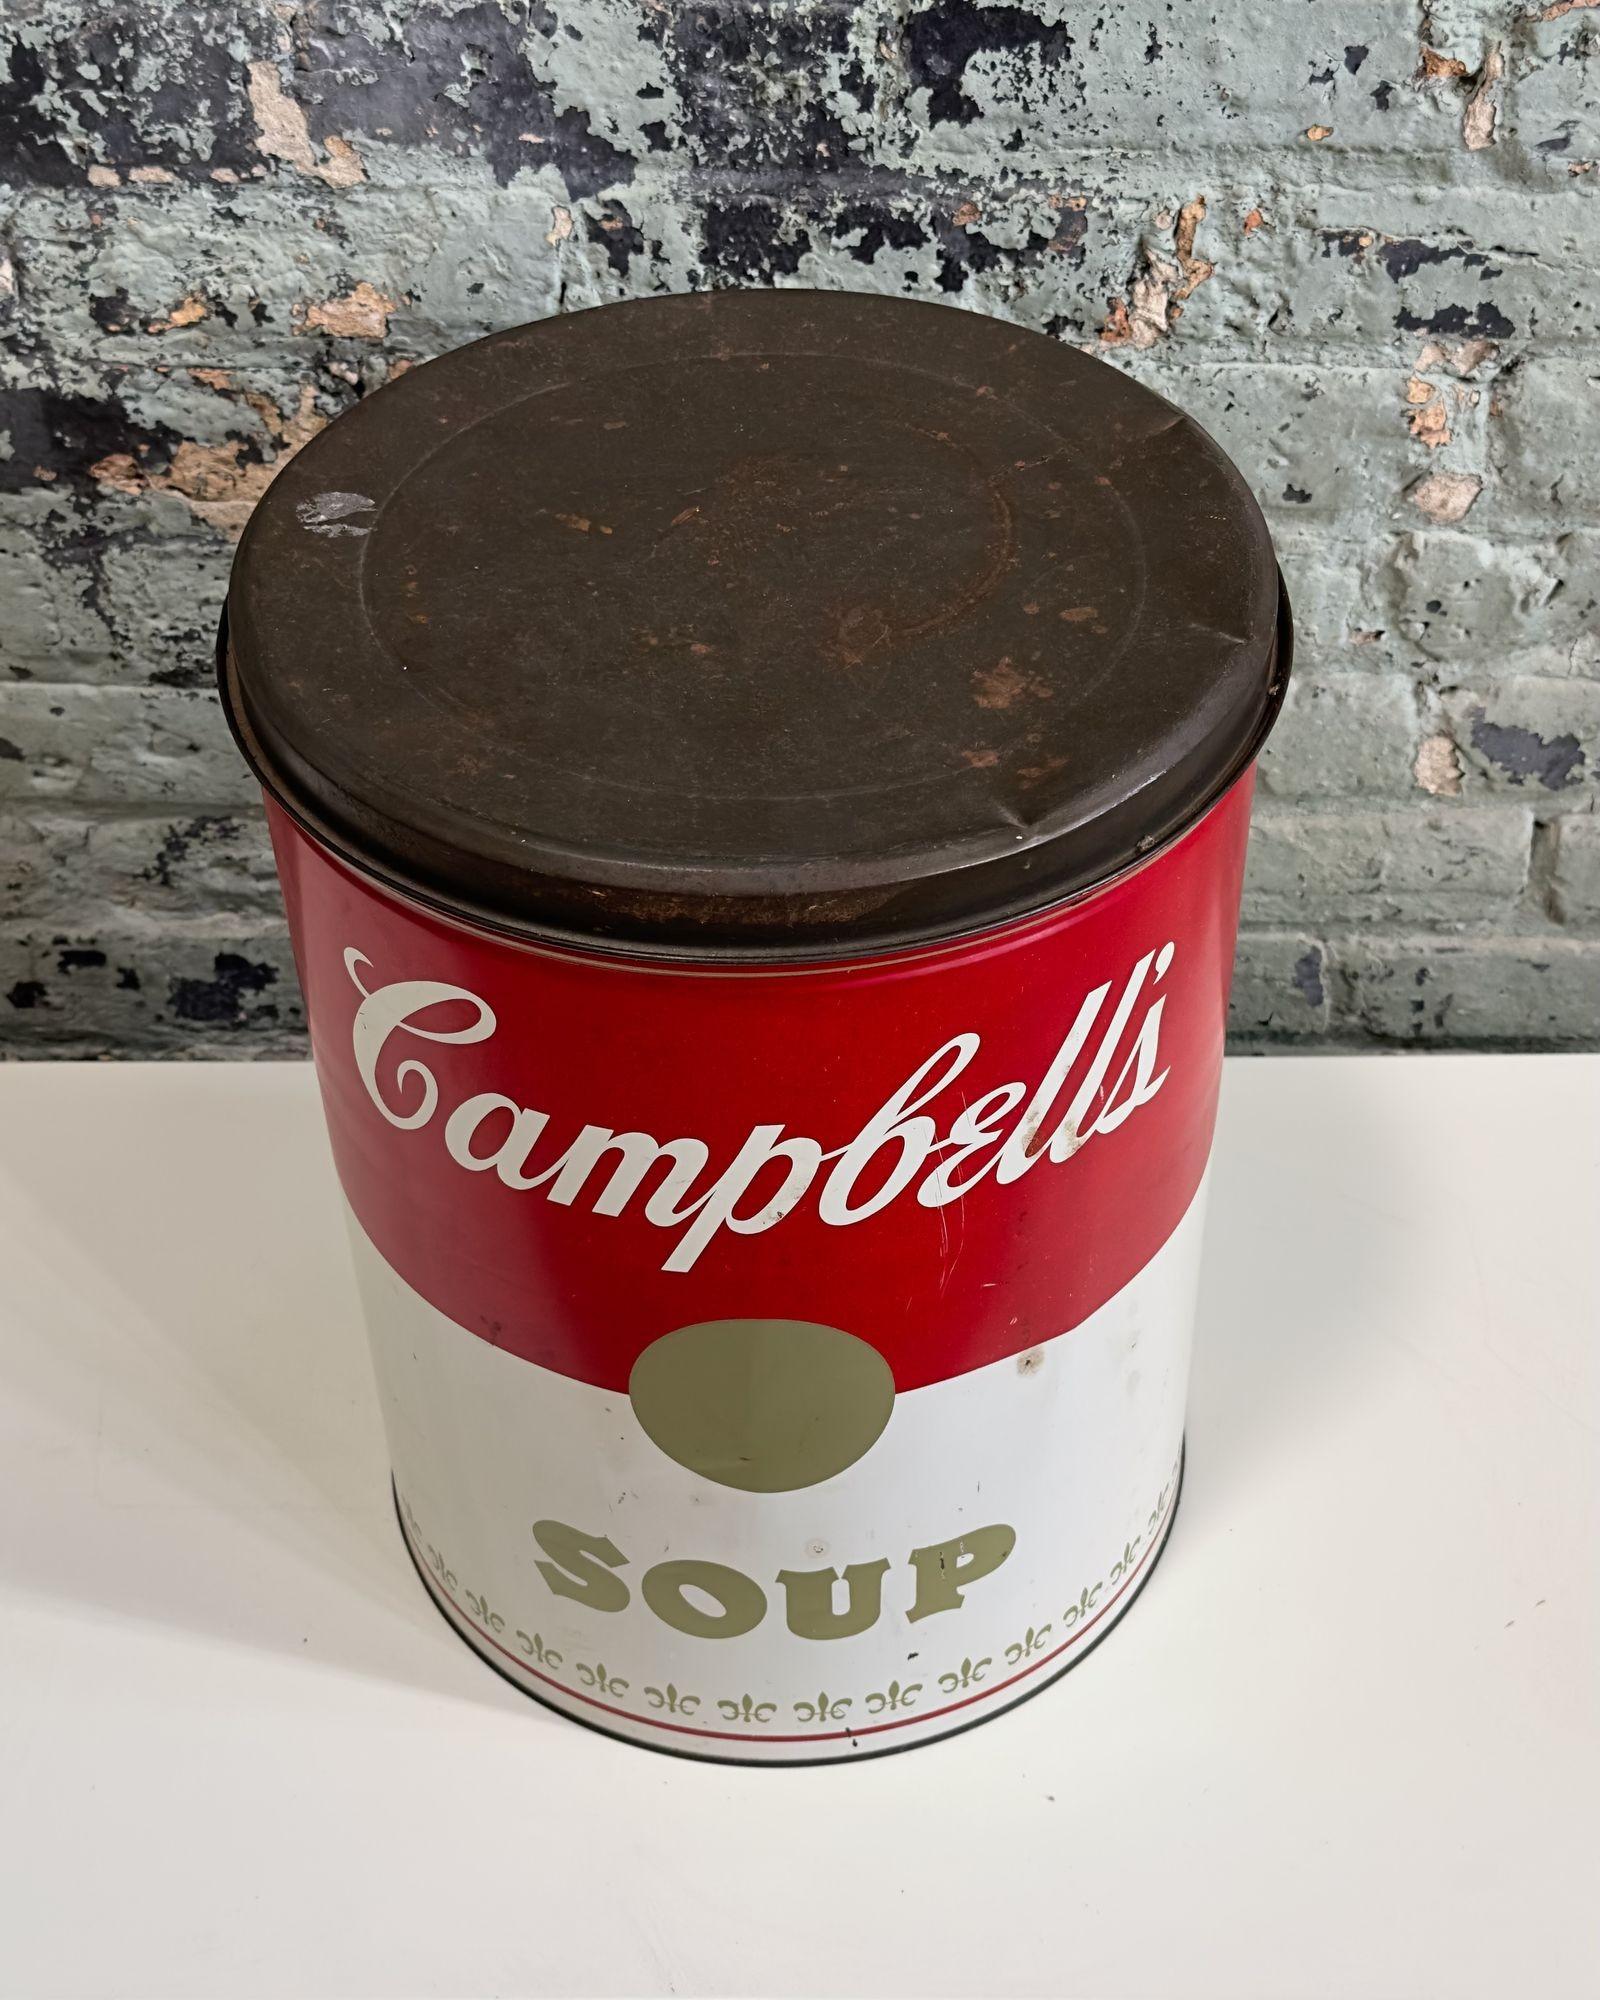 Mid-20th Century Plasticonvertible Corp. Campbell's Soup Can, 1960